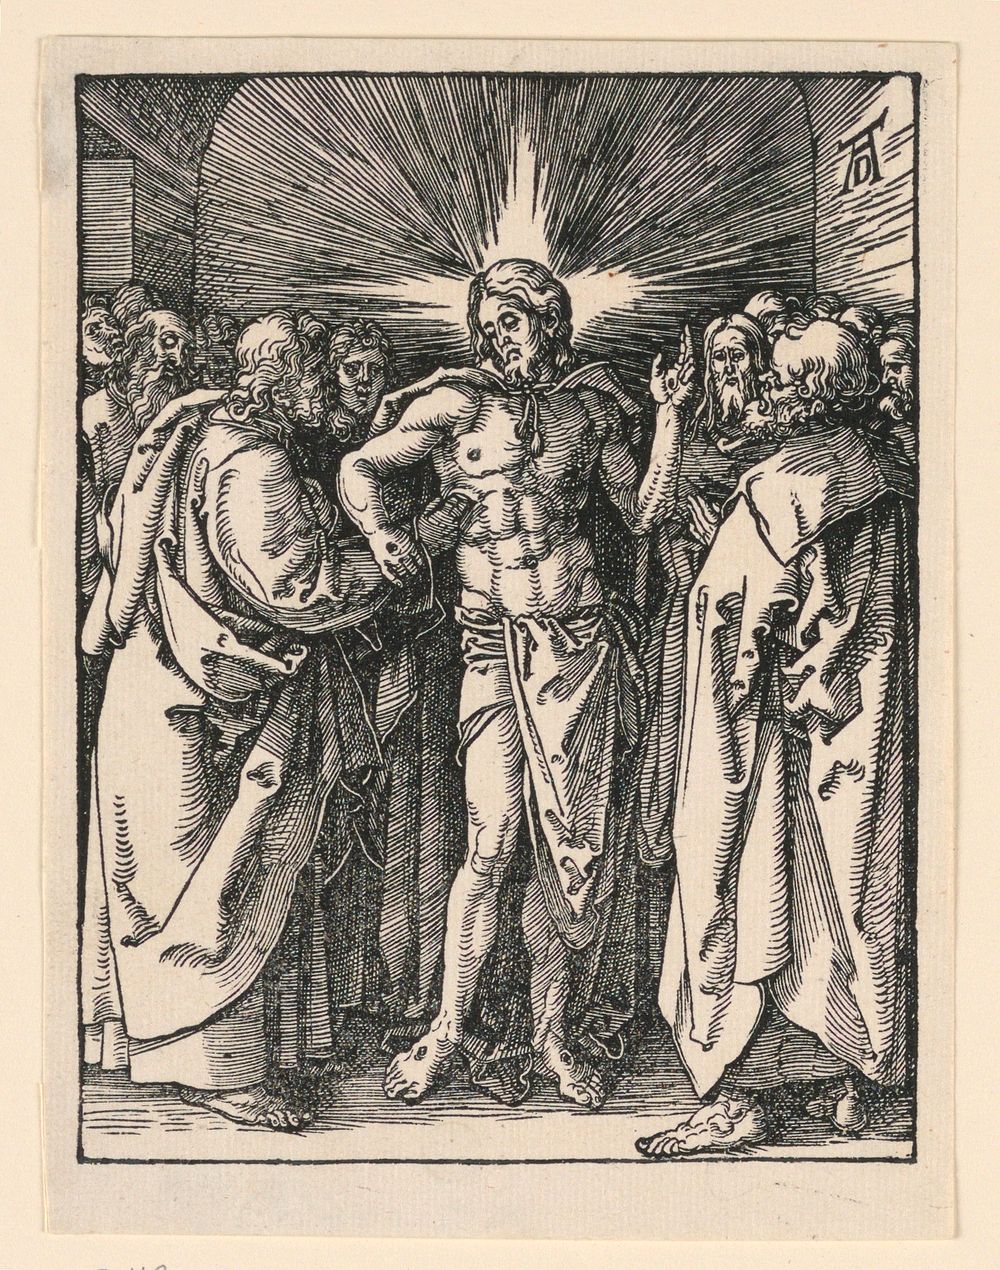 The Incredulity of Saint Thomas, from The Little Passion Series, Albrecht Drer